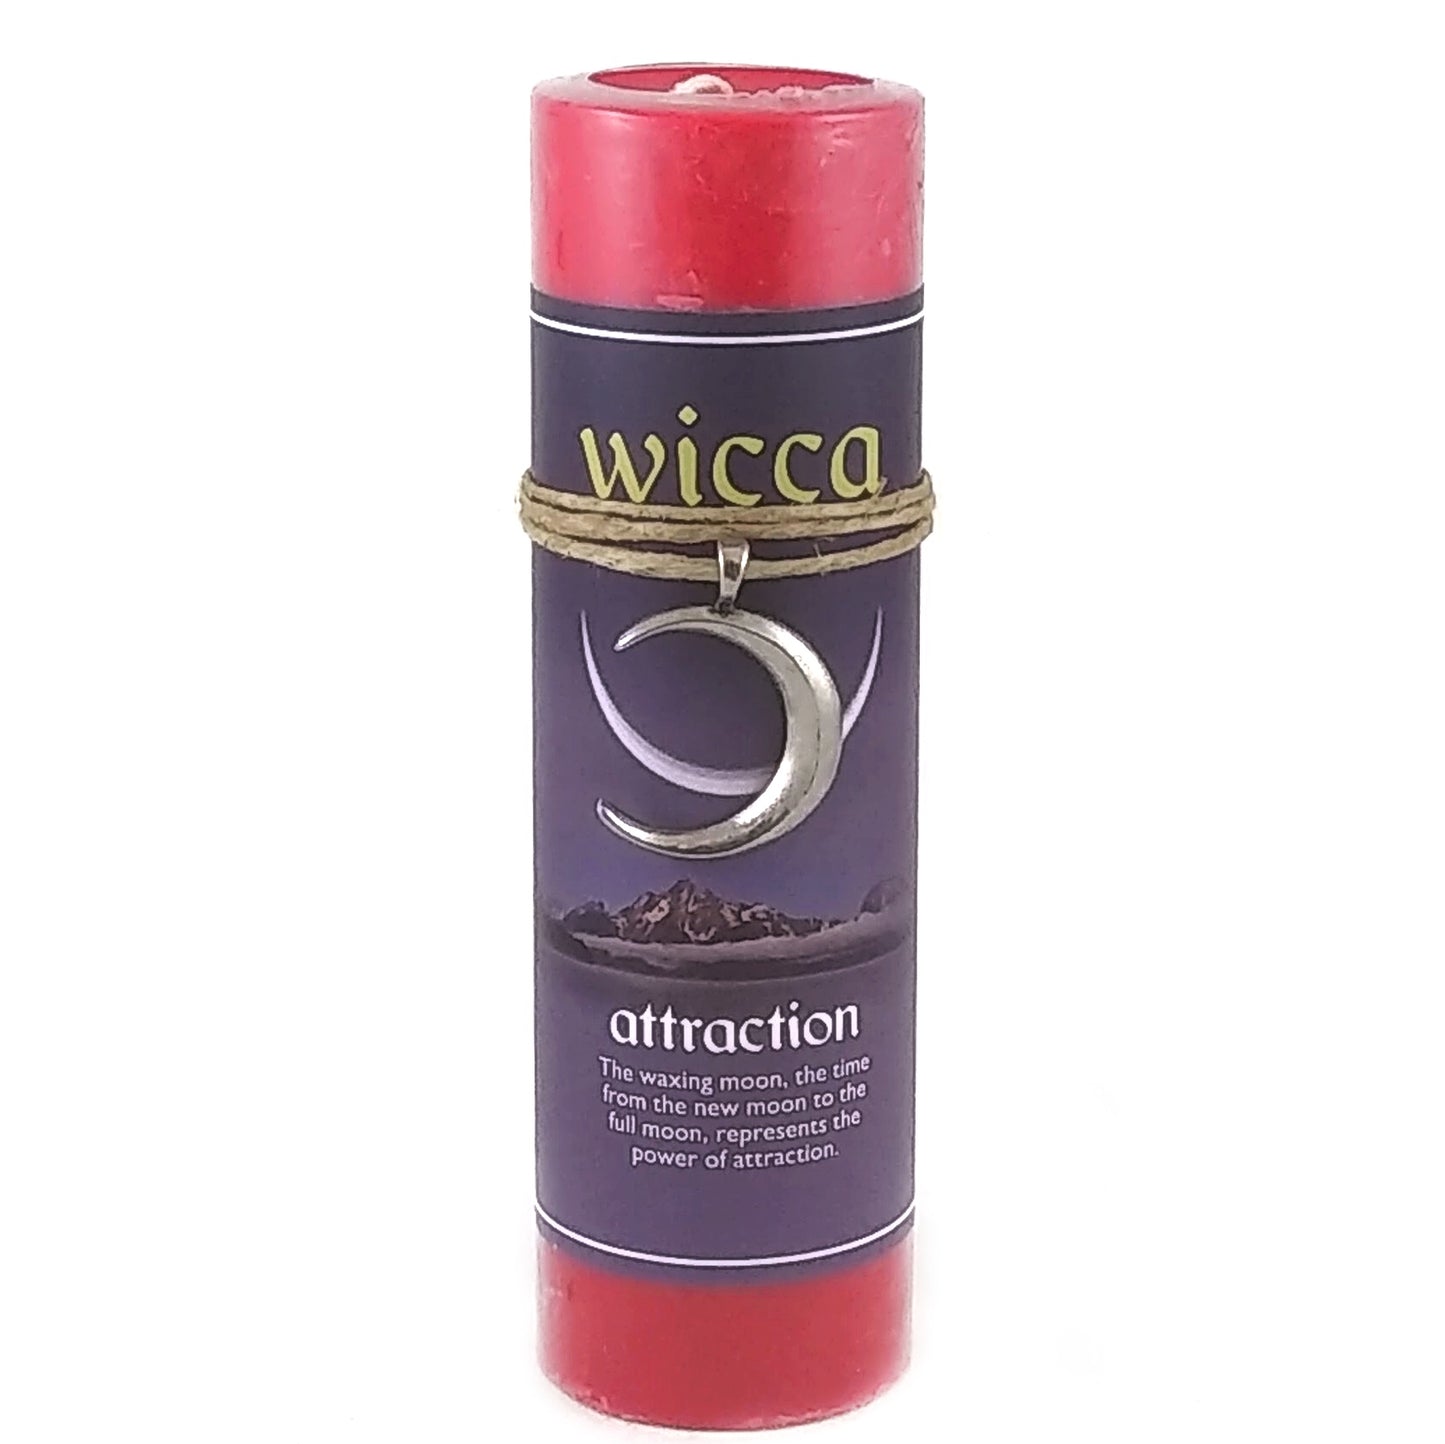 Wicca Scented Candle - Attraction with Pewter Pendant